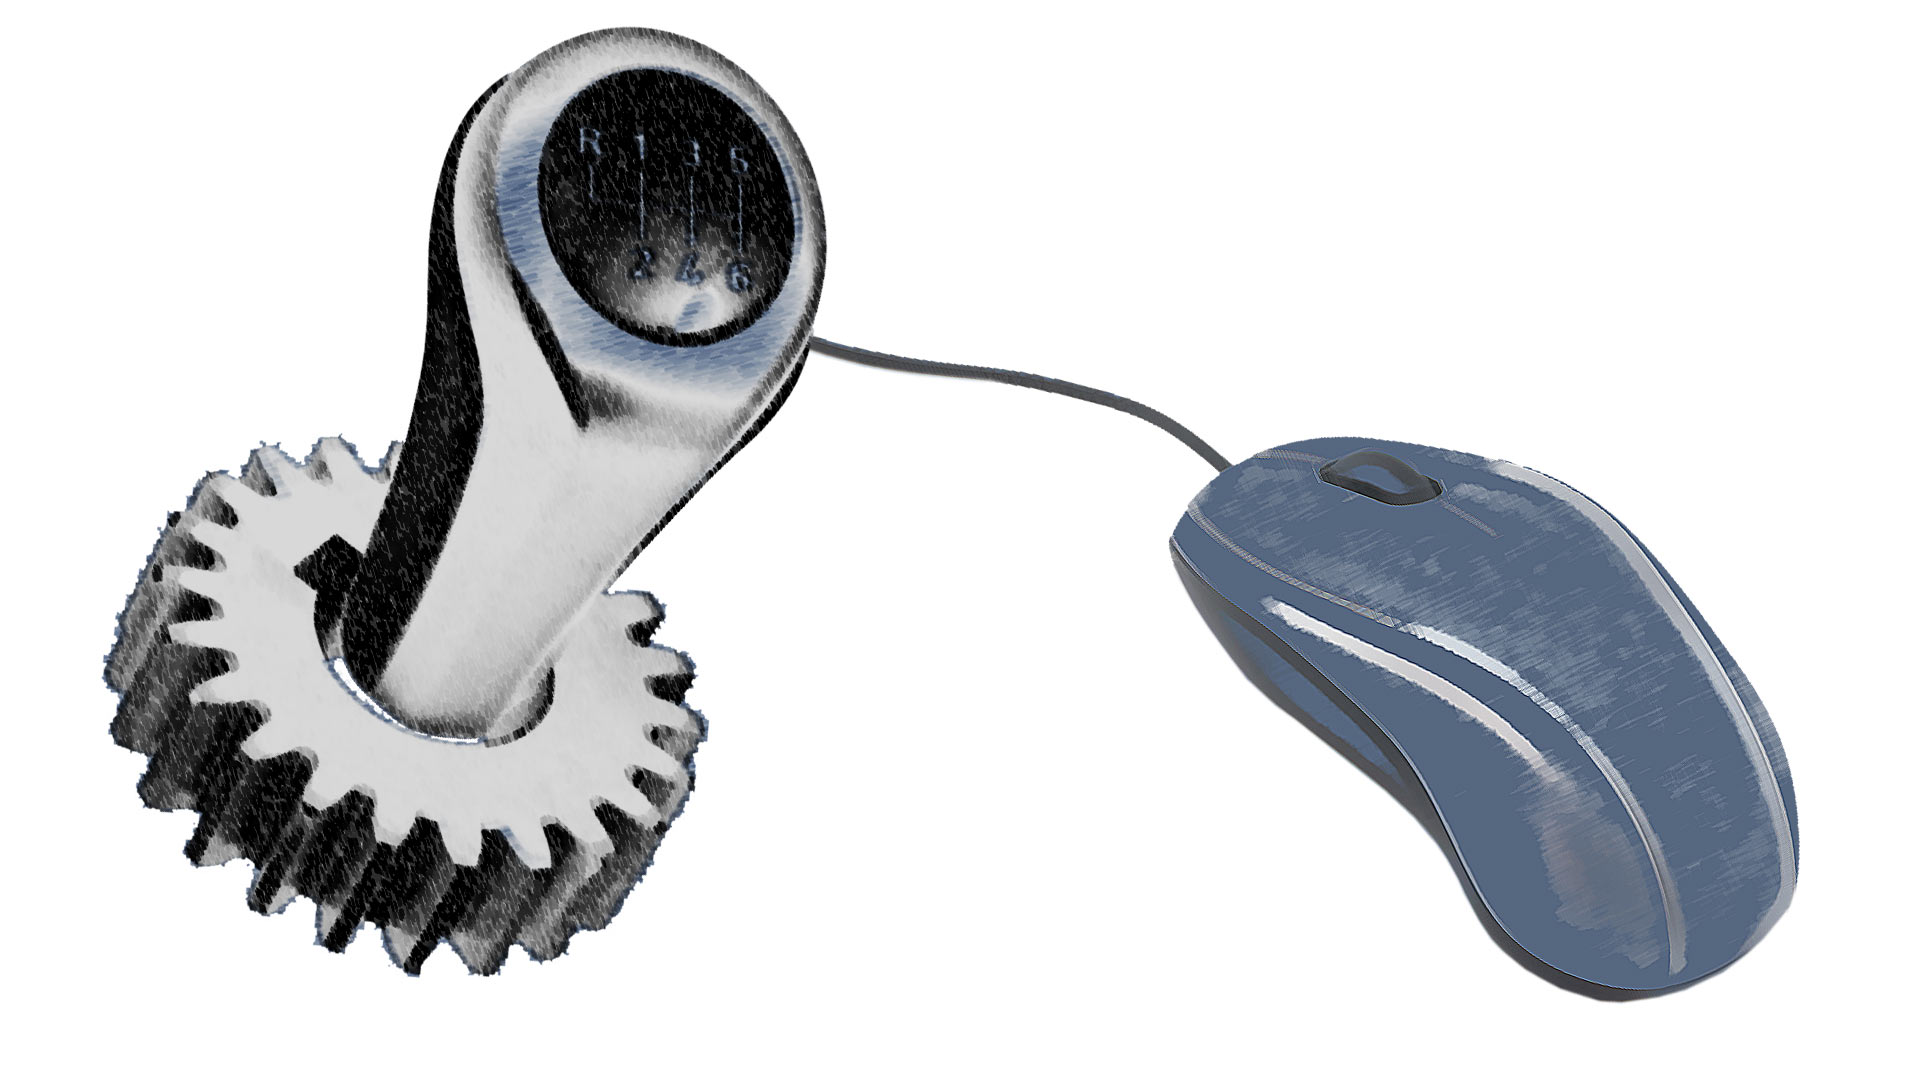 A computer mouse controlling a gear lever